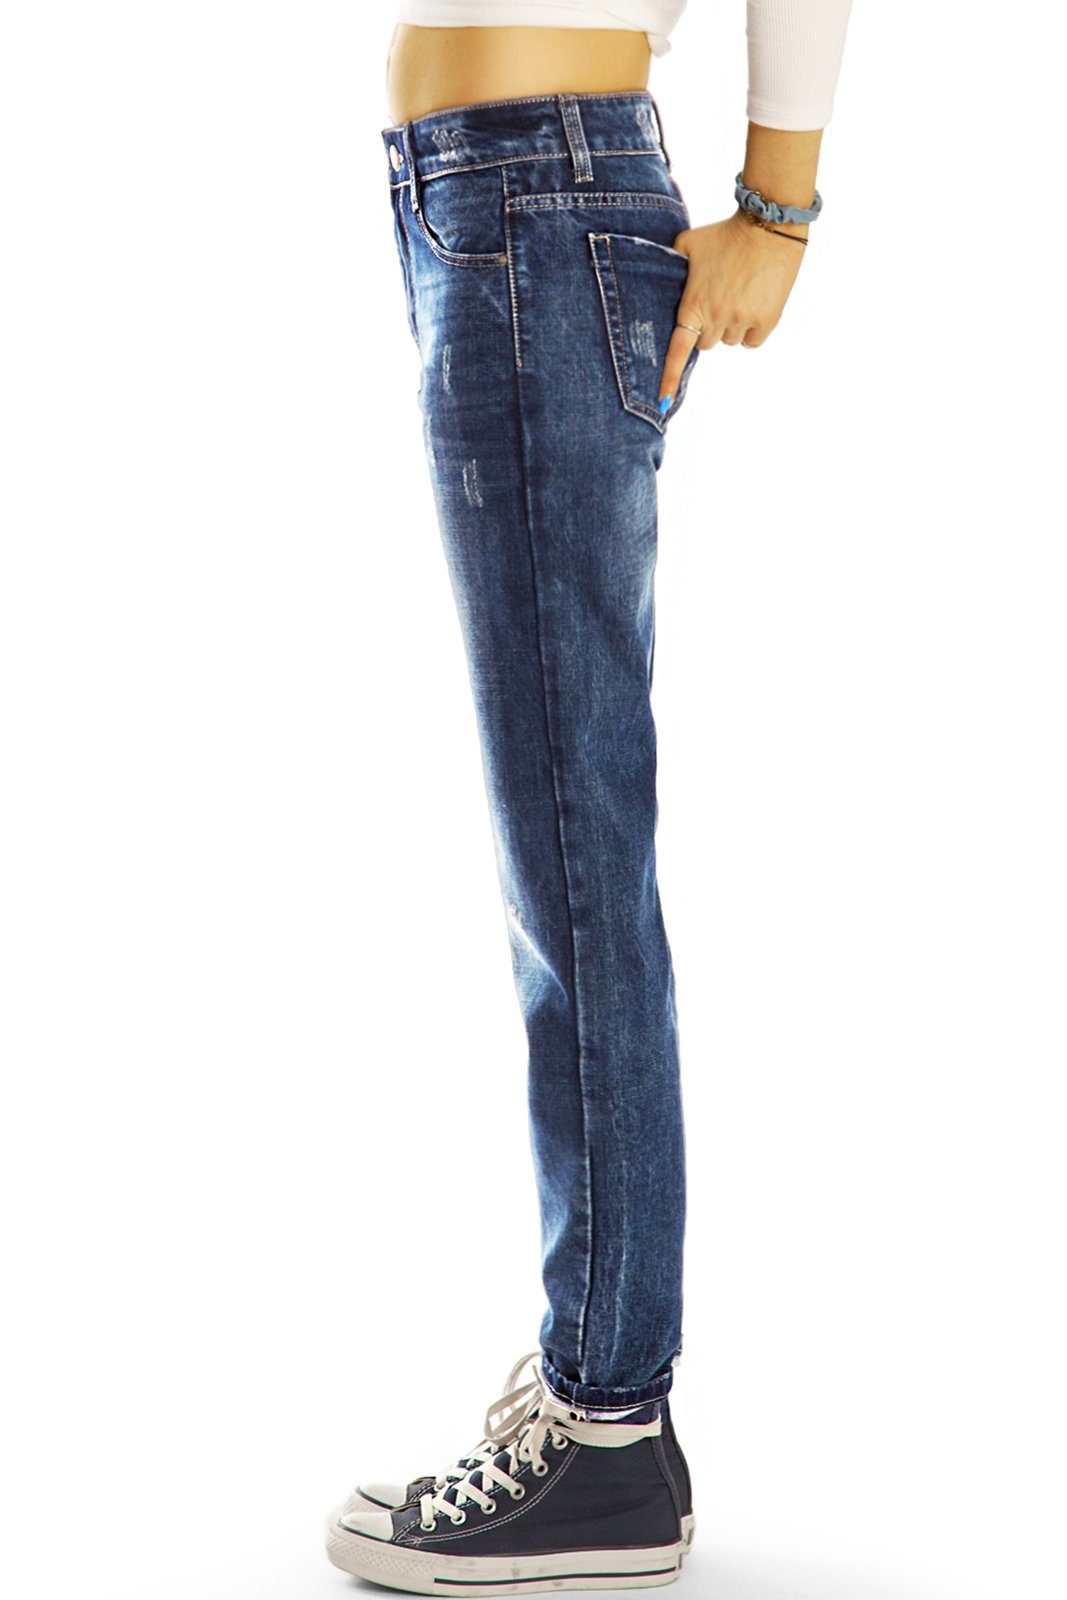 5-Pocket-Style Tapered Baggyjeans Bequem Tapered-fit-Jeans - - Boyfriend j9f - Hose Locker be styled fit Damen